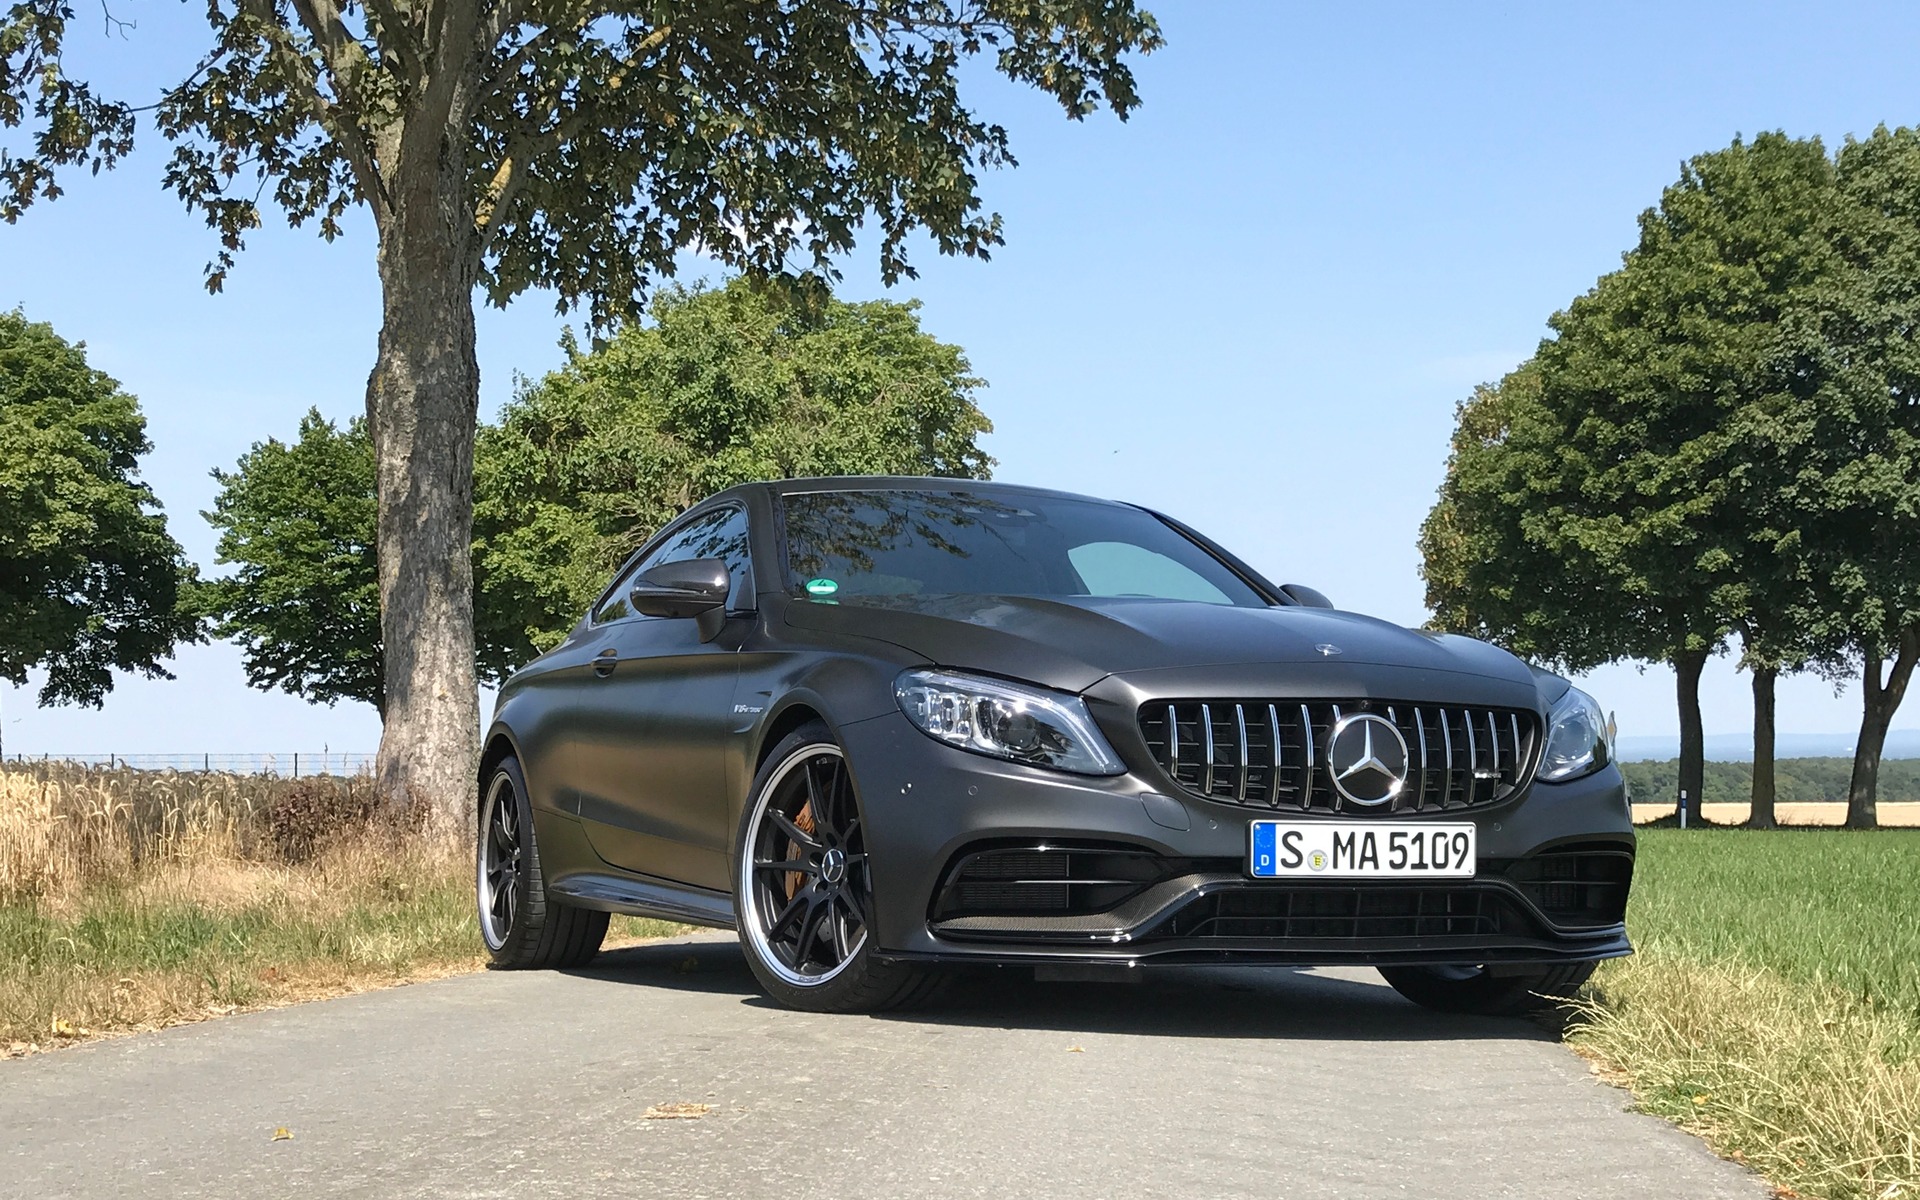 2019 Mercedes-AMG C 63: The New Benchmark - The Car Guide